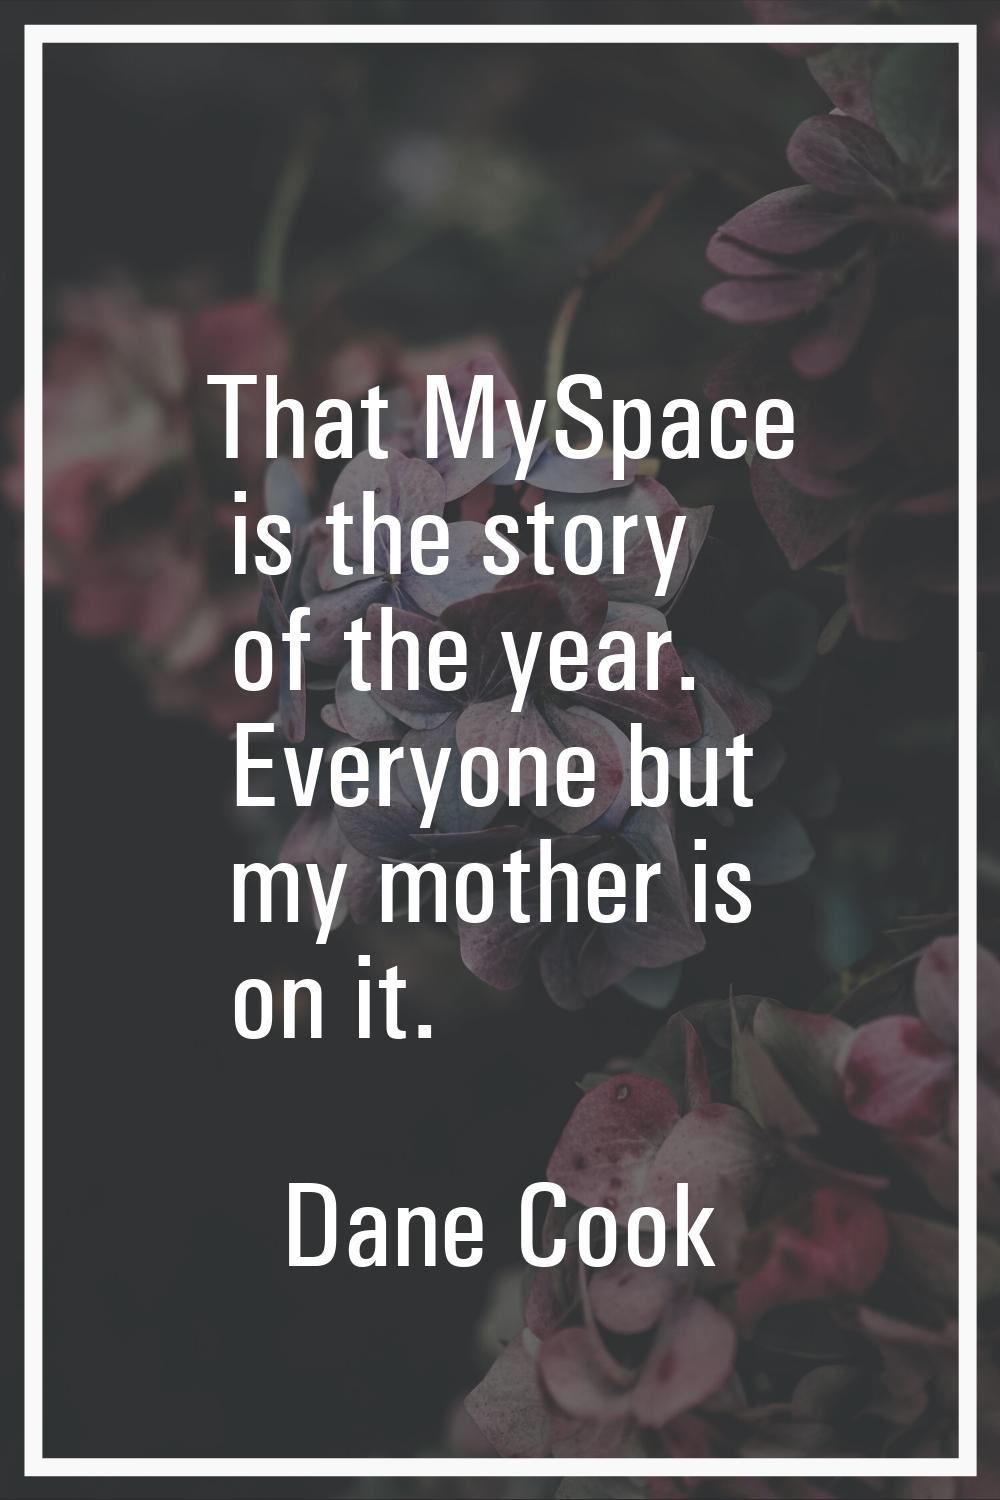 That MySpace is the story of the year. Everyone but my mother is on it.